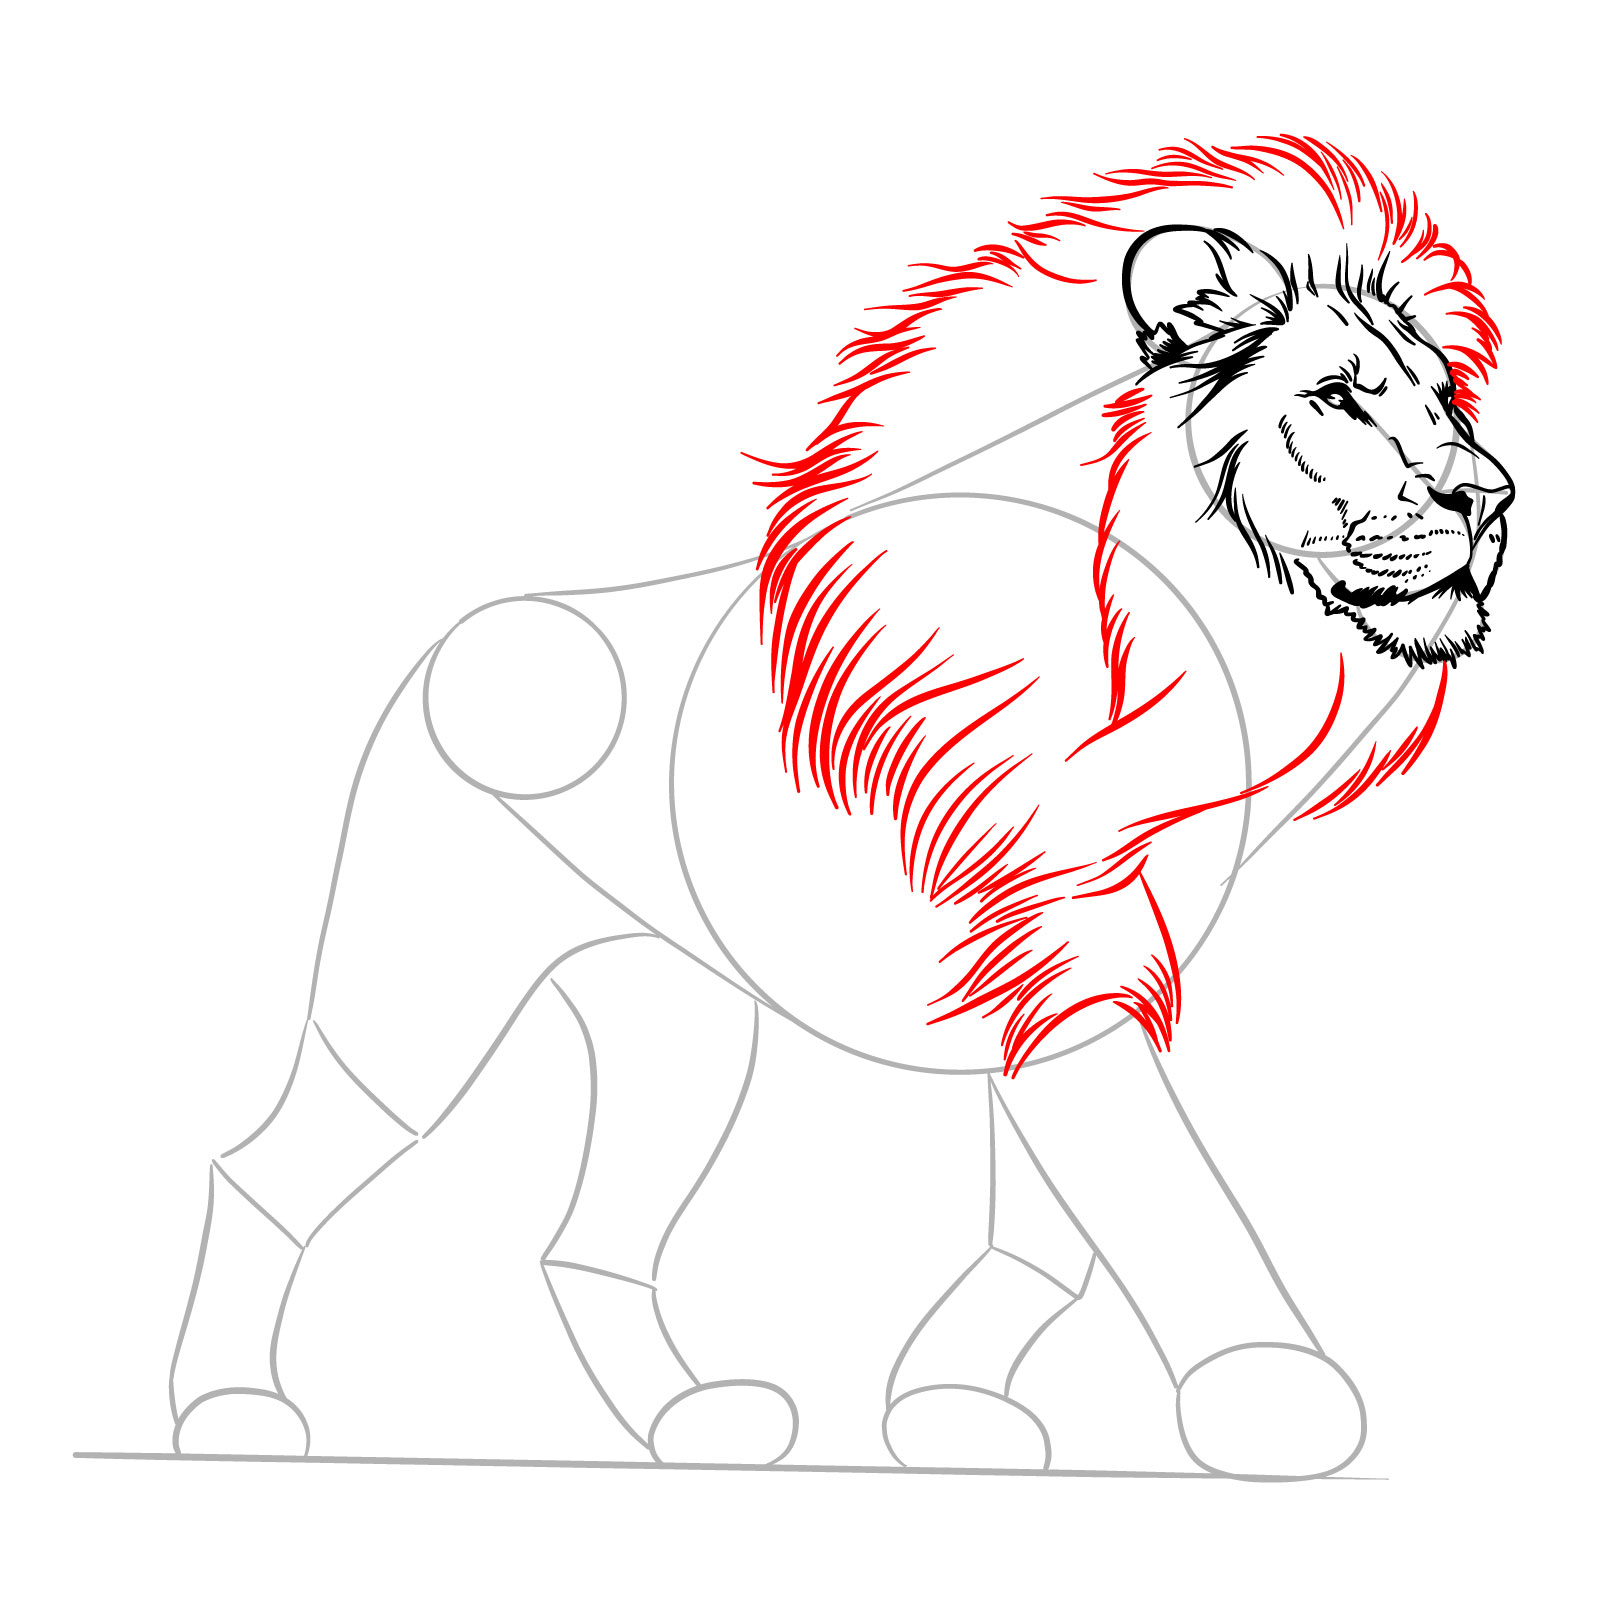 How to draw the main part of a lion's mane - step 08